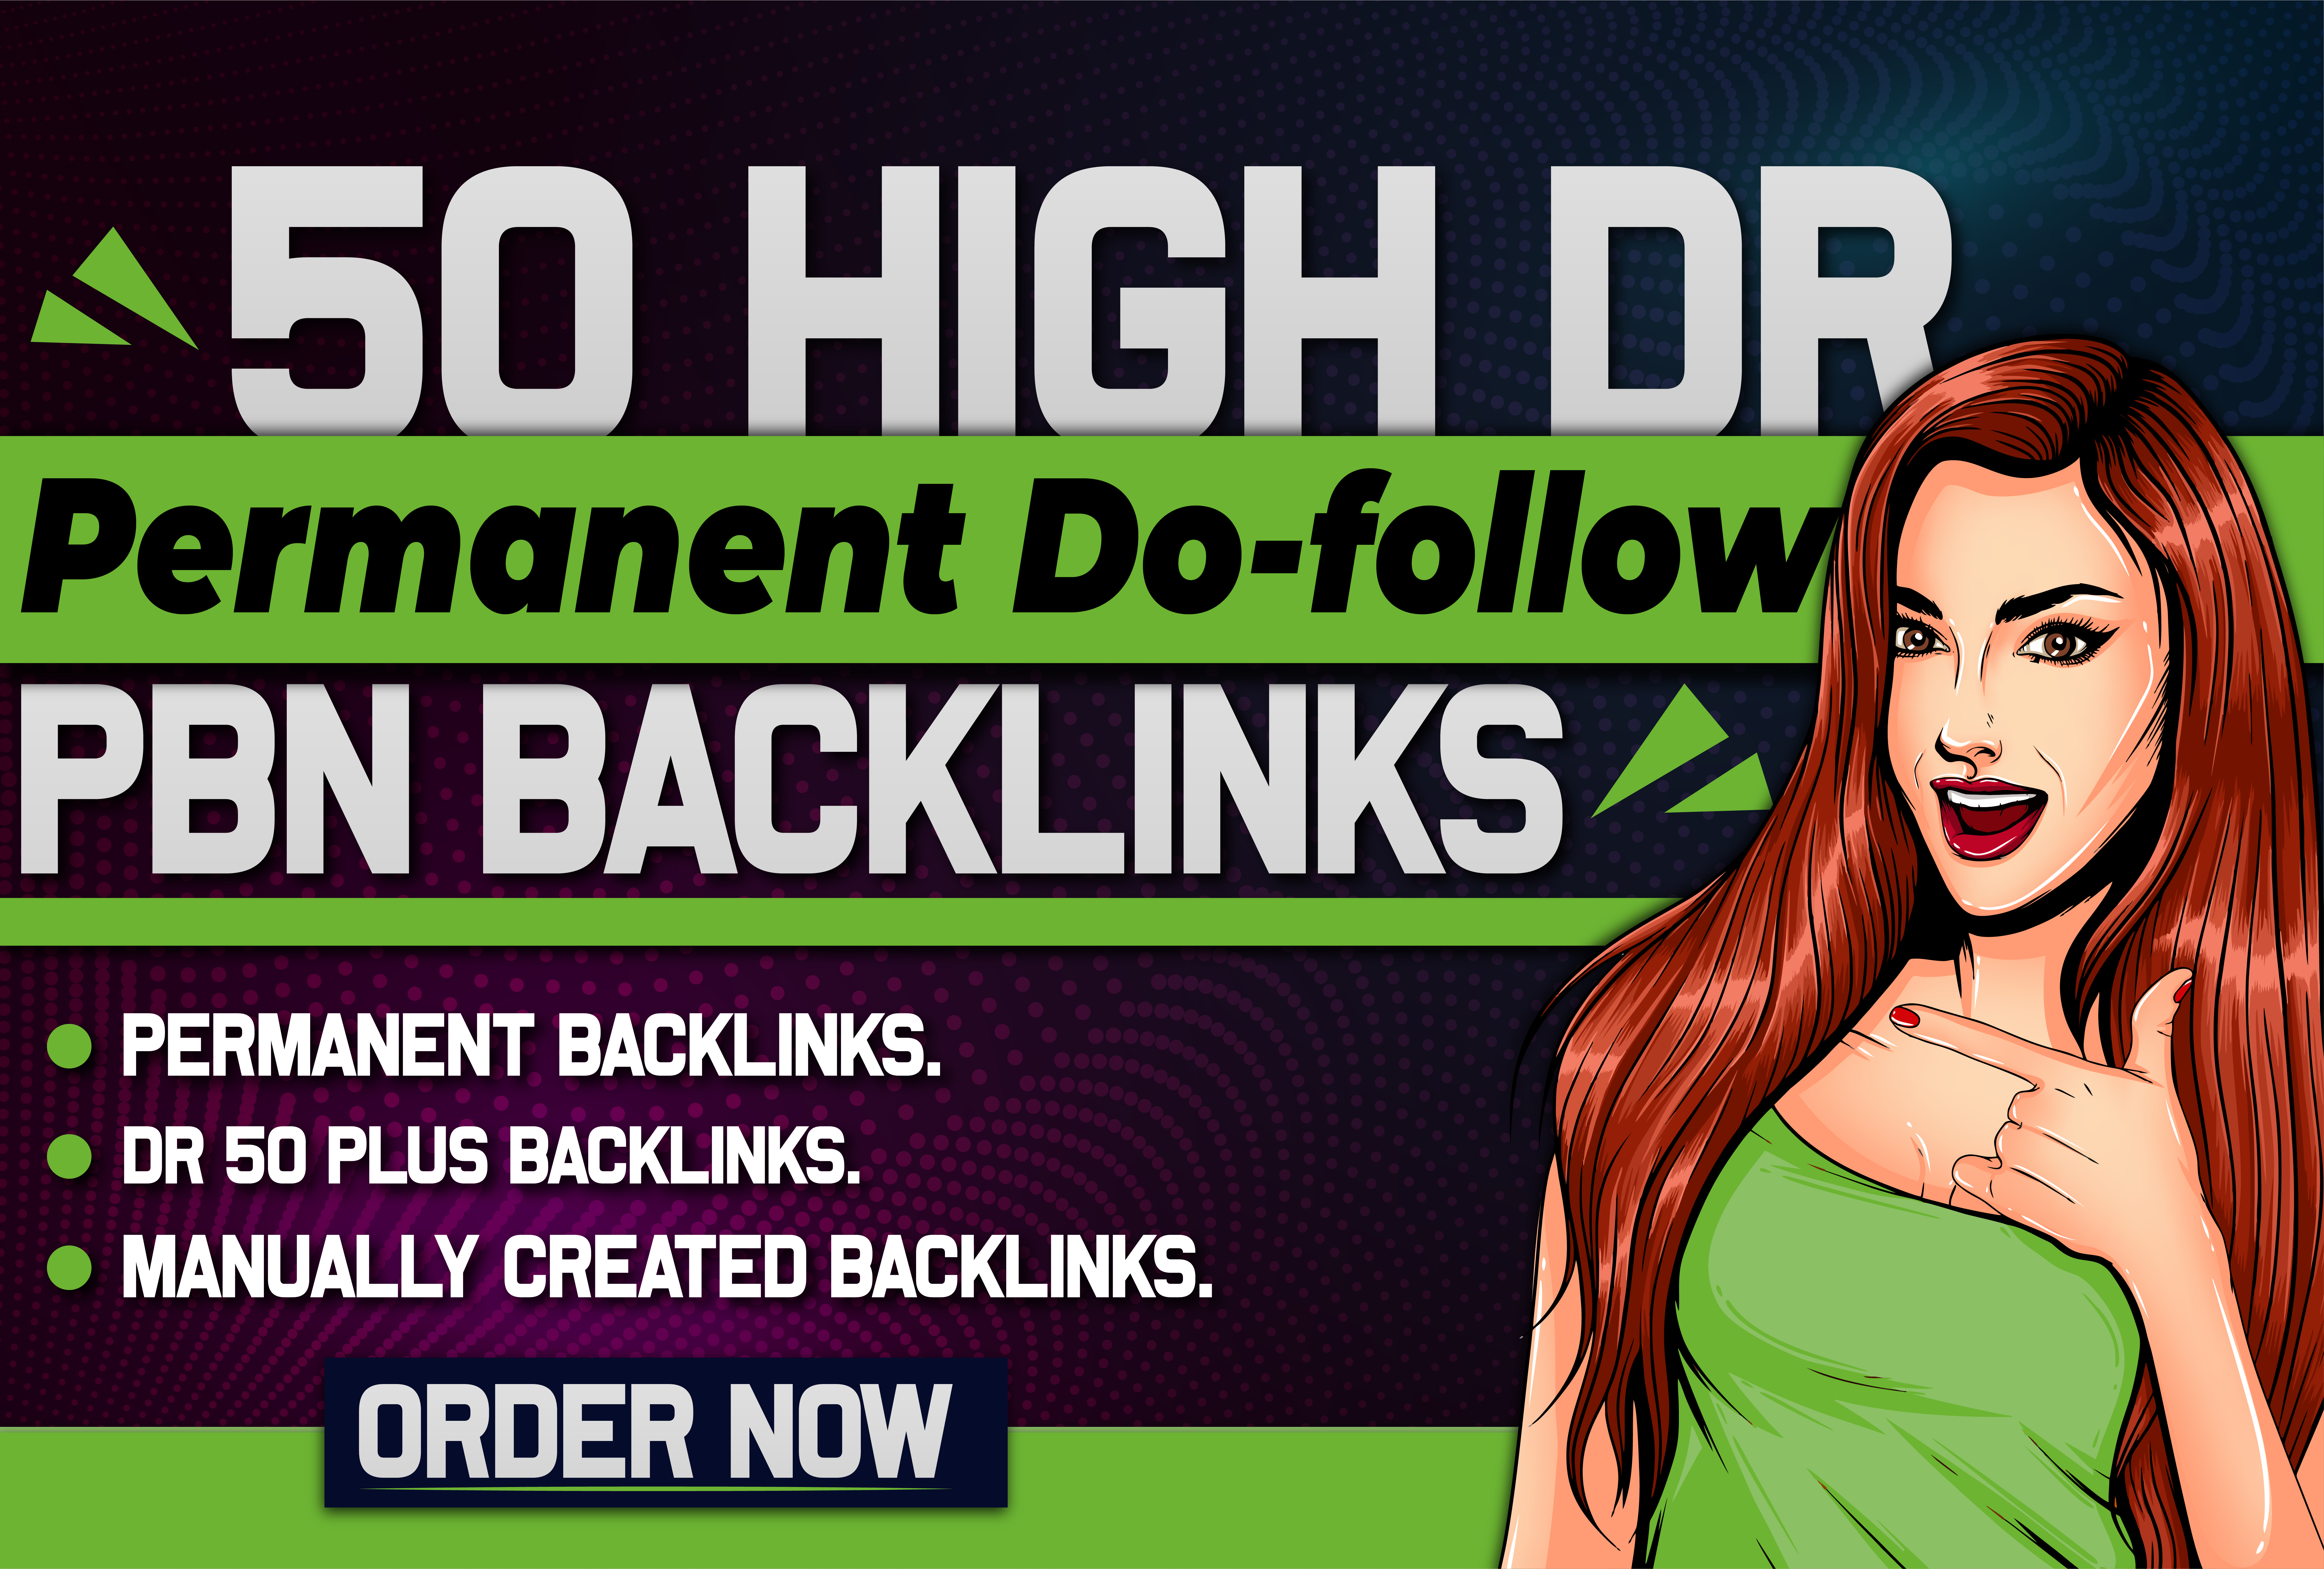 50 HIGH DR Permanent Dofollow PBN Backlinks 50 to 70 Plus